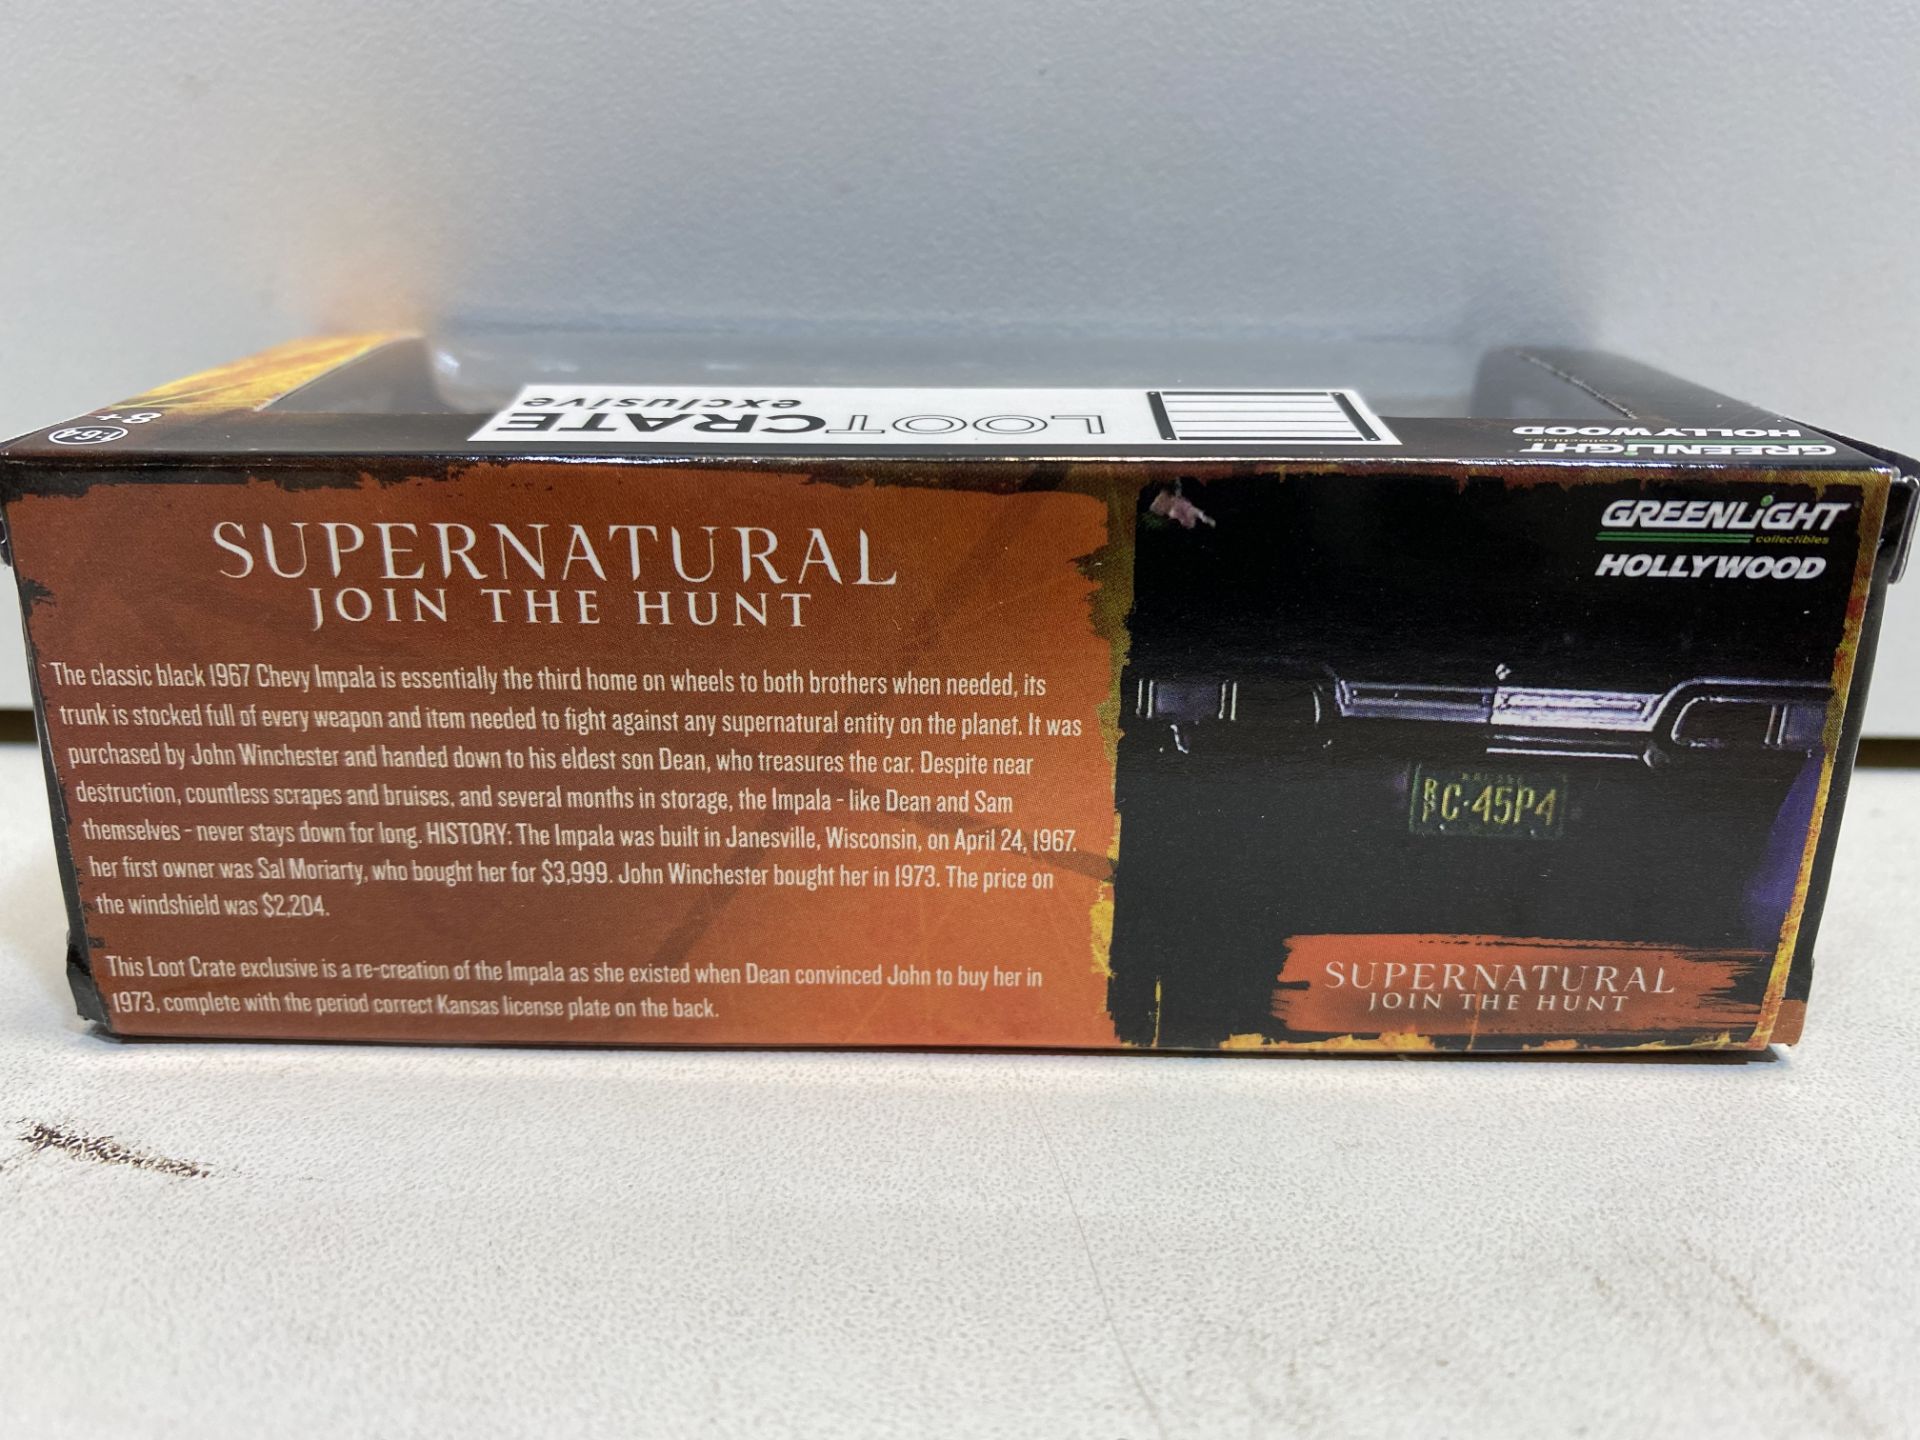 25 x Chevrolet Impala - Supernatural - Loot Crate Exclusive - Image 3 of 3